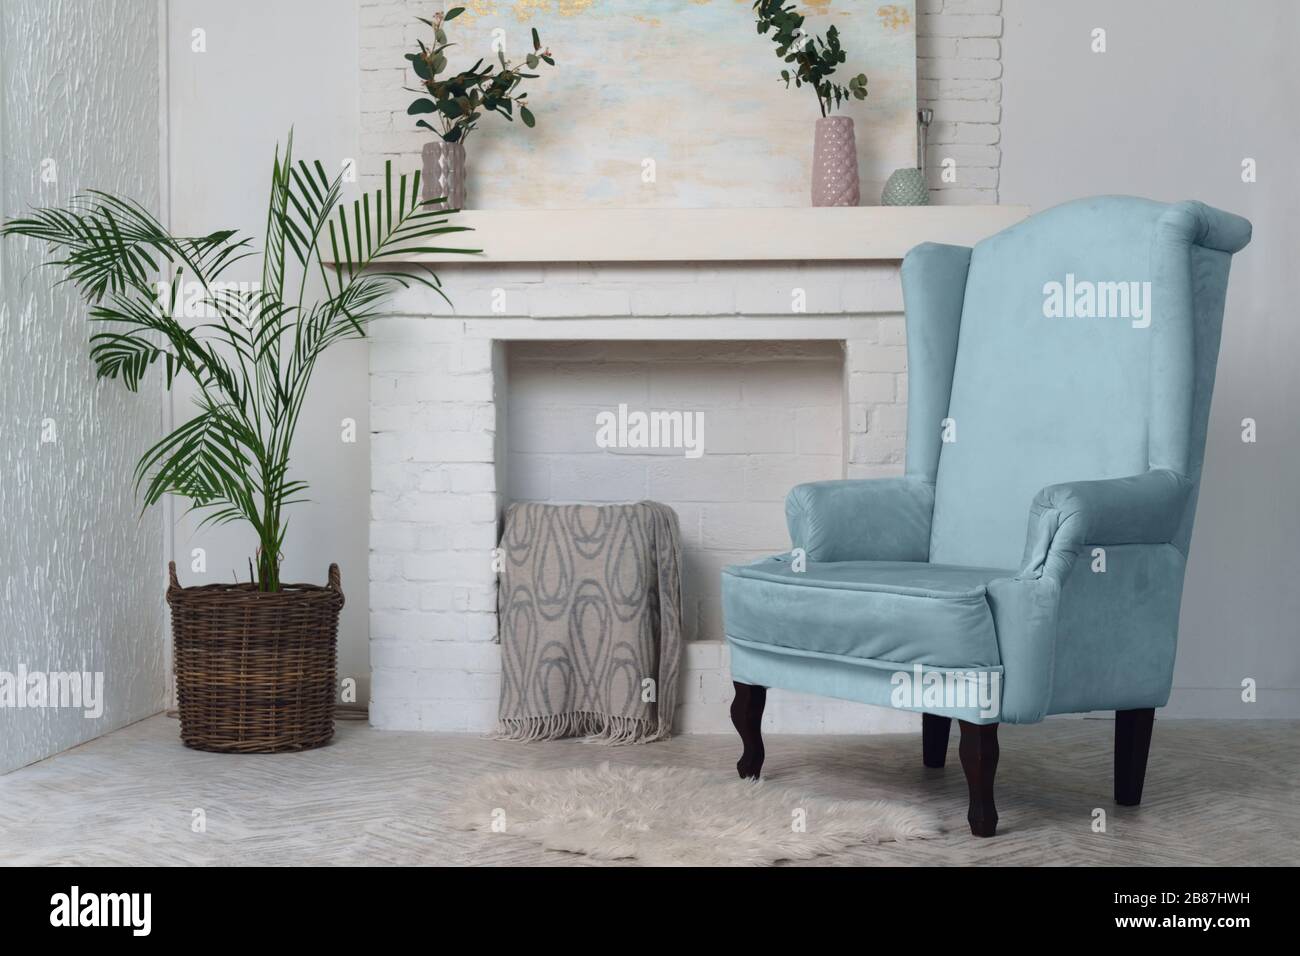 Blue armchair and indoor plants and fireplace in the background. Classical living room furniture and potted plants Stock Photo